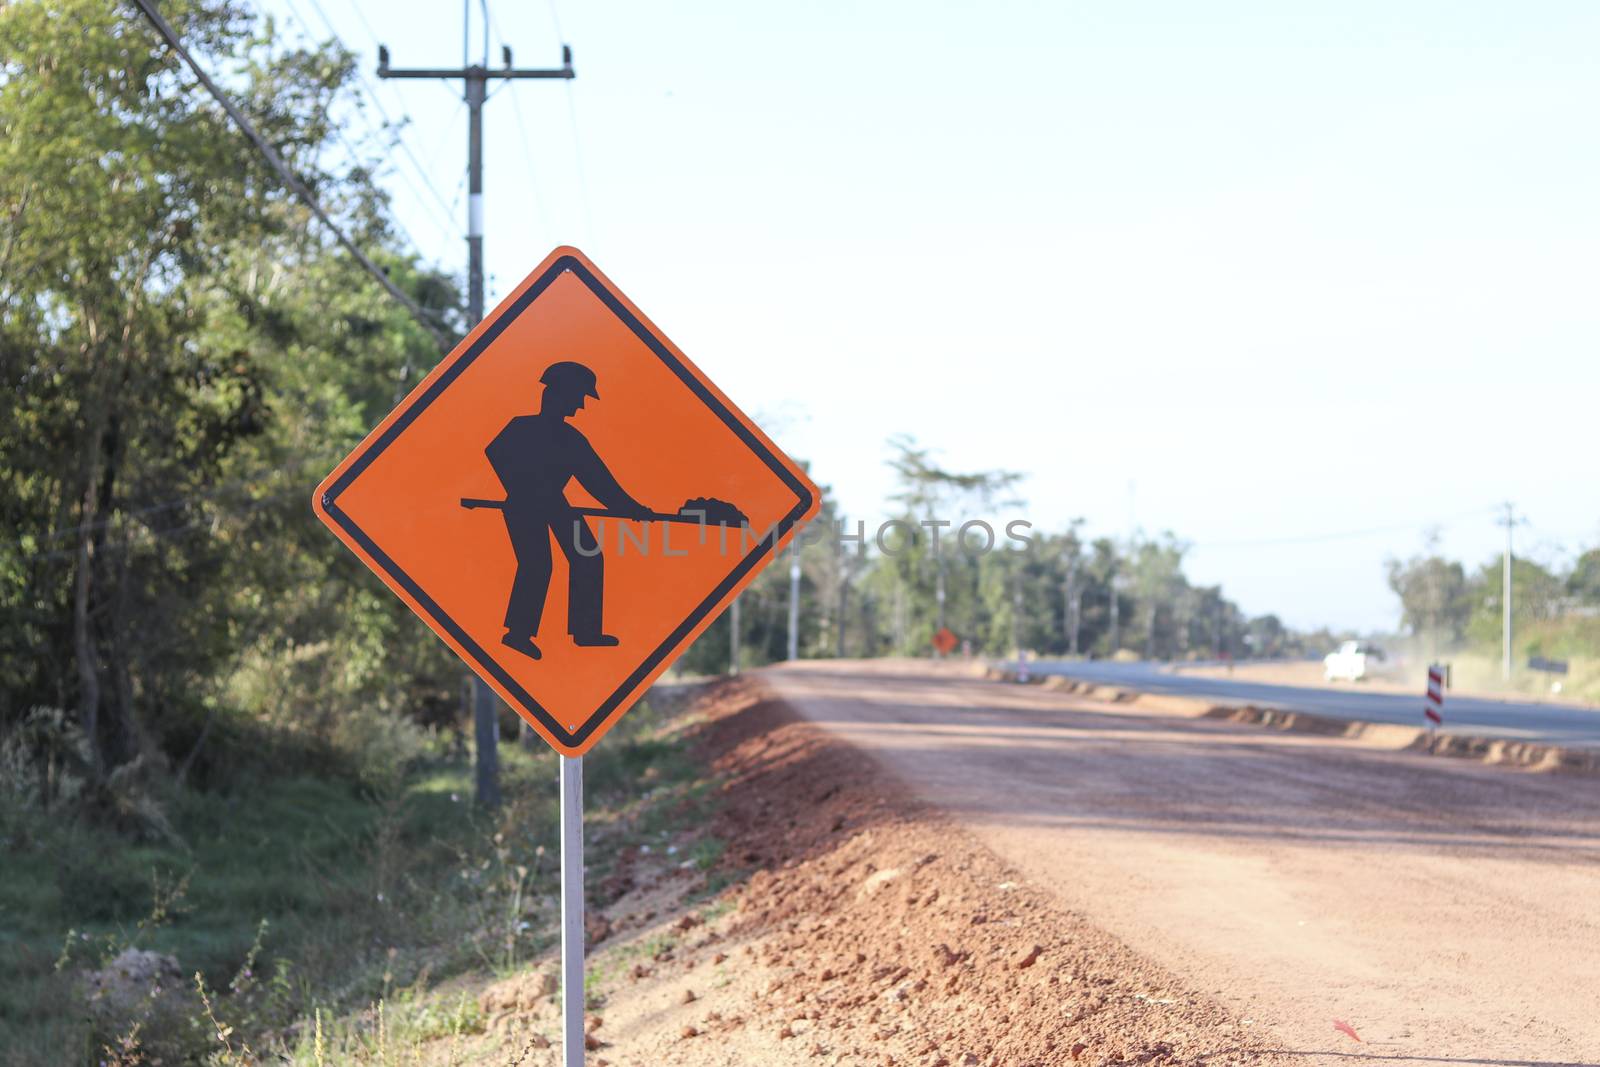 The orange sign shows a symbol with the image of a person holding a shovel on the sign installed on the side of the construction road. Warning sign indicating road work is ahead.